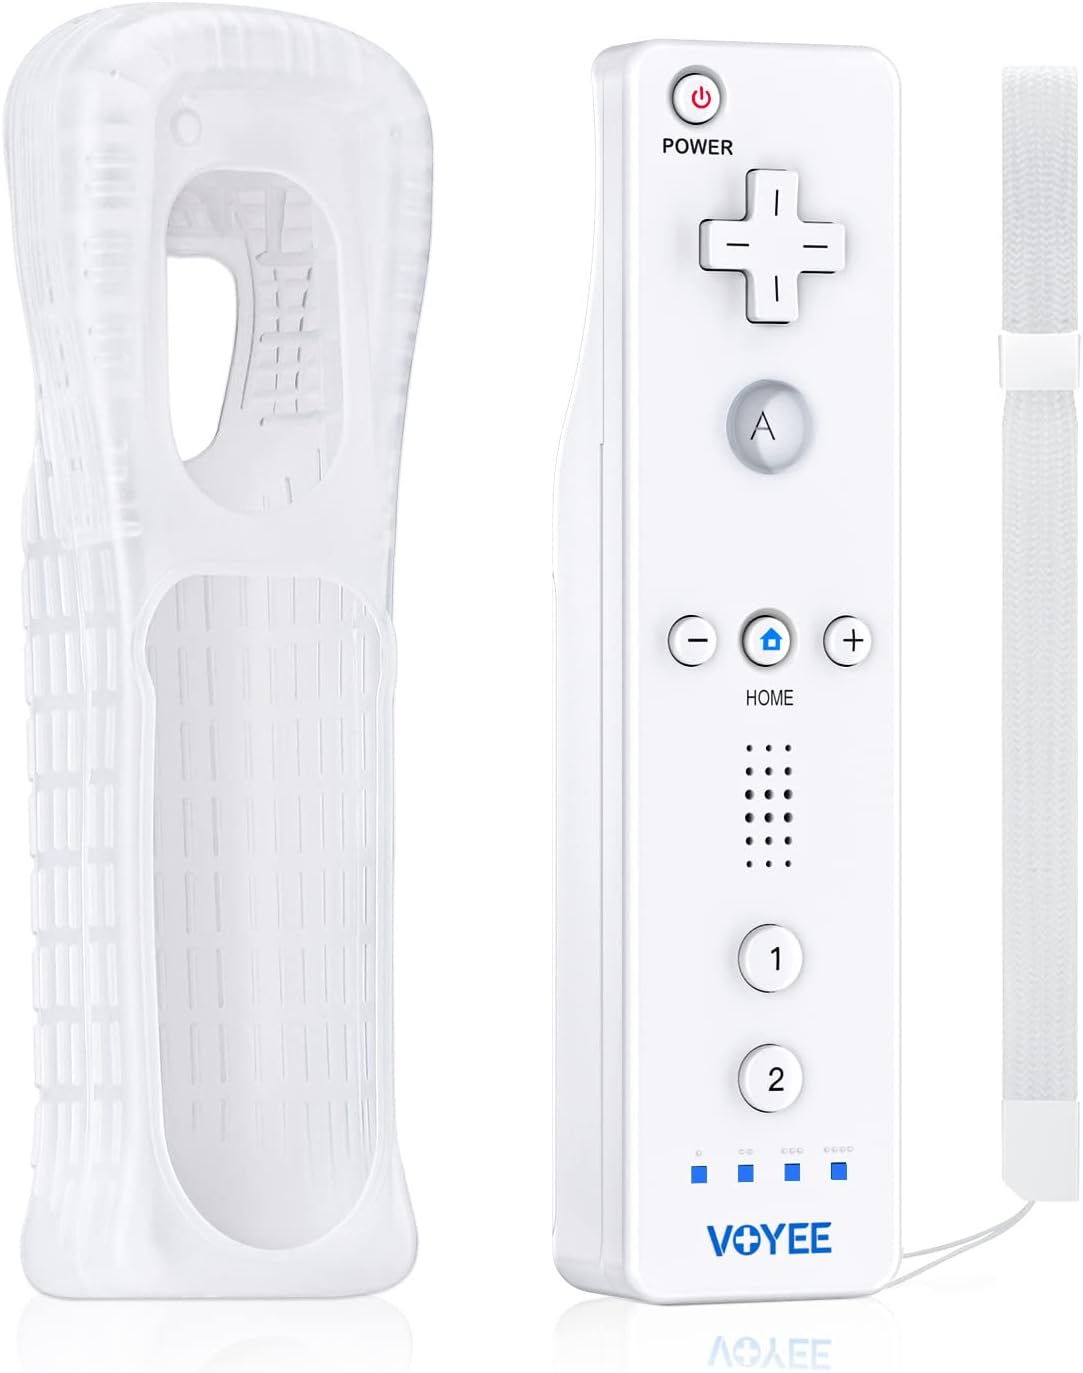 Wireless Bluetooth Game Controller with Built-in Motion Plus Sensor for Wii and for Wii U Console For Wii Remote Controller